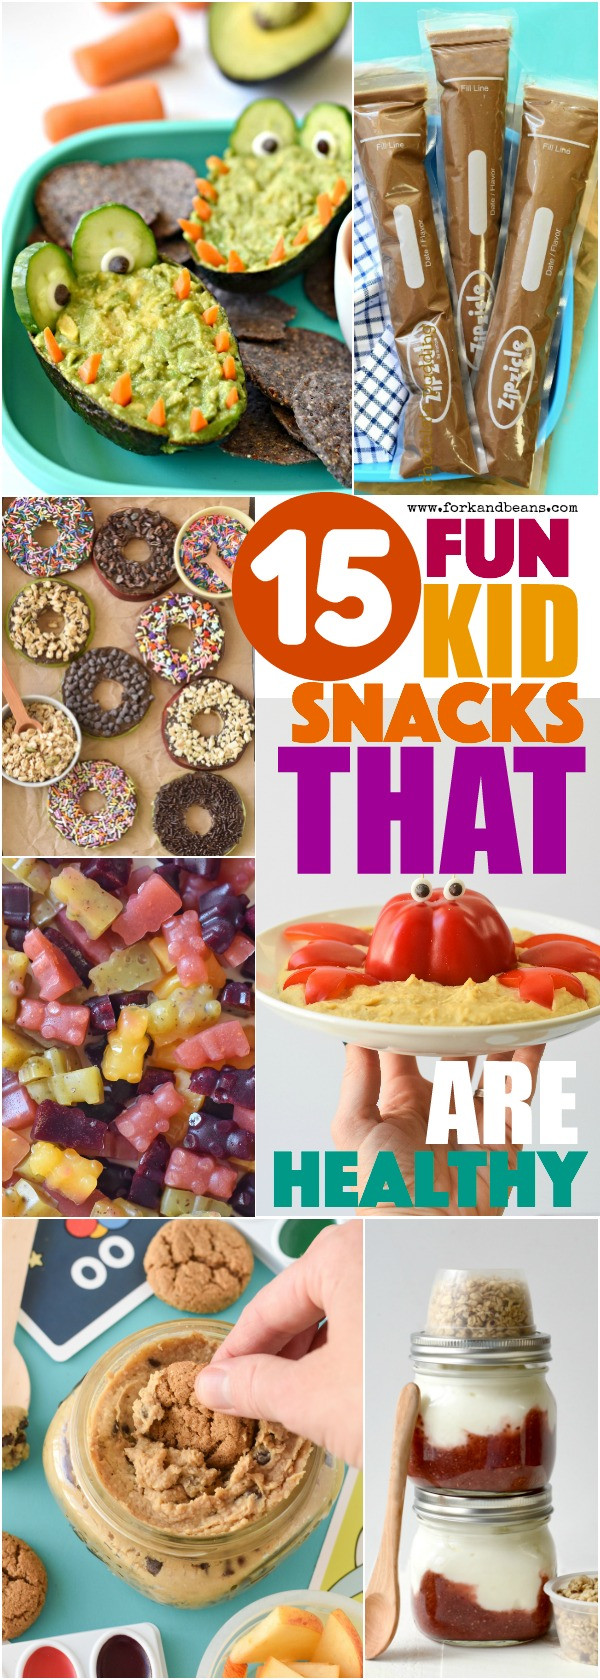 Healthy Afterschool Snacks For Weight Loss
 Healthy After School Snacks Fork and Beans